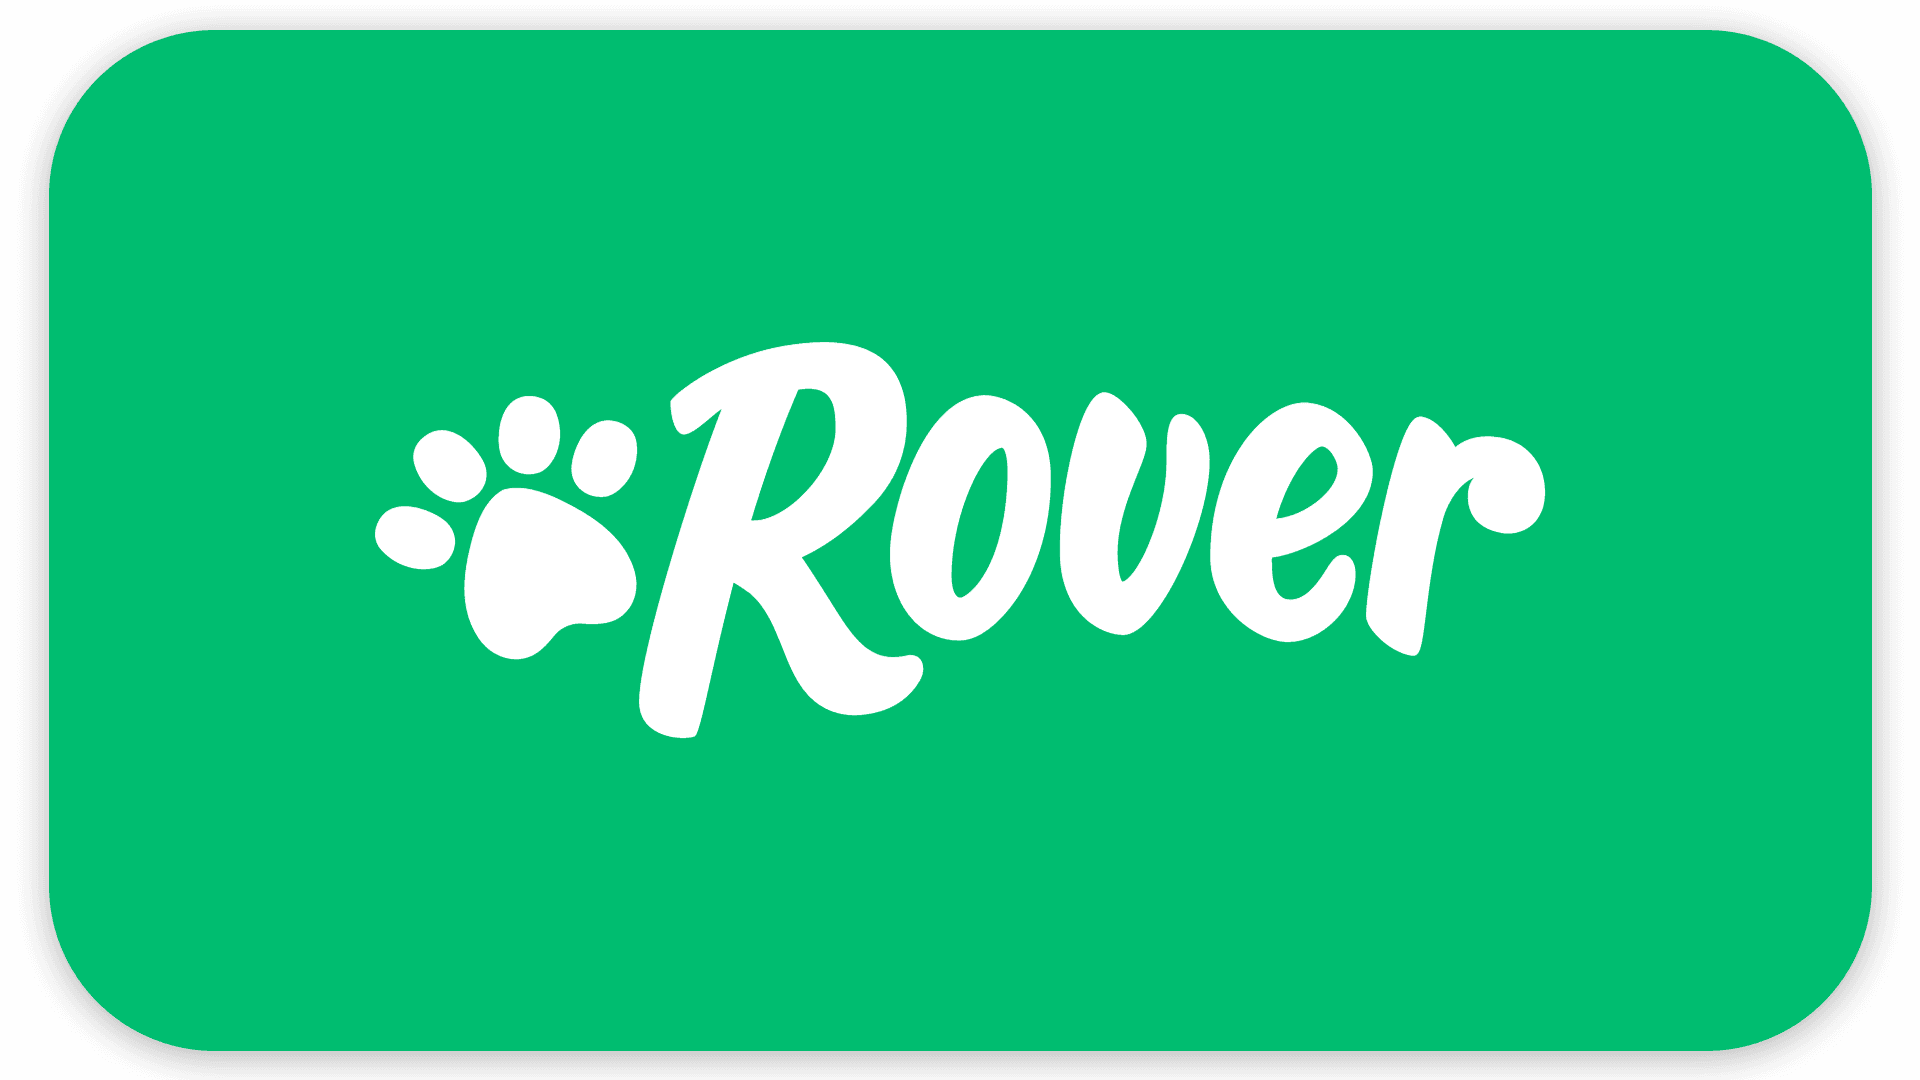 Green rectangle with the word "Rover" in white styled with a dog paw print.